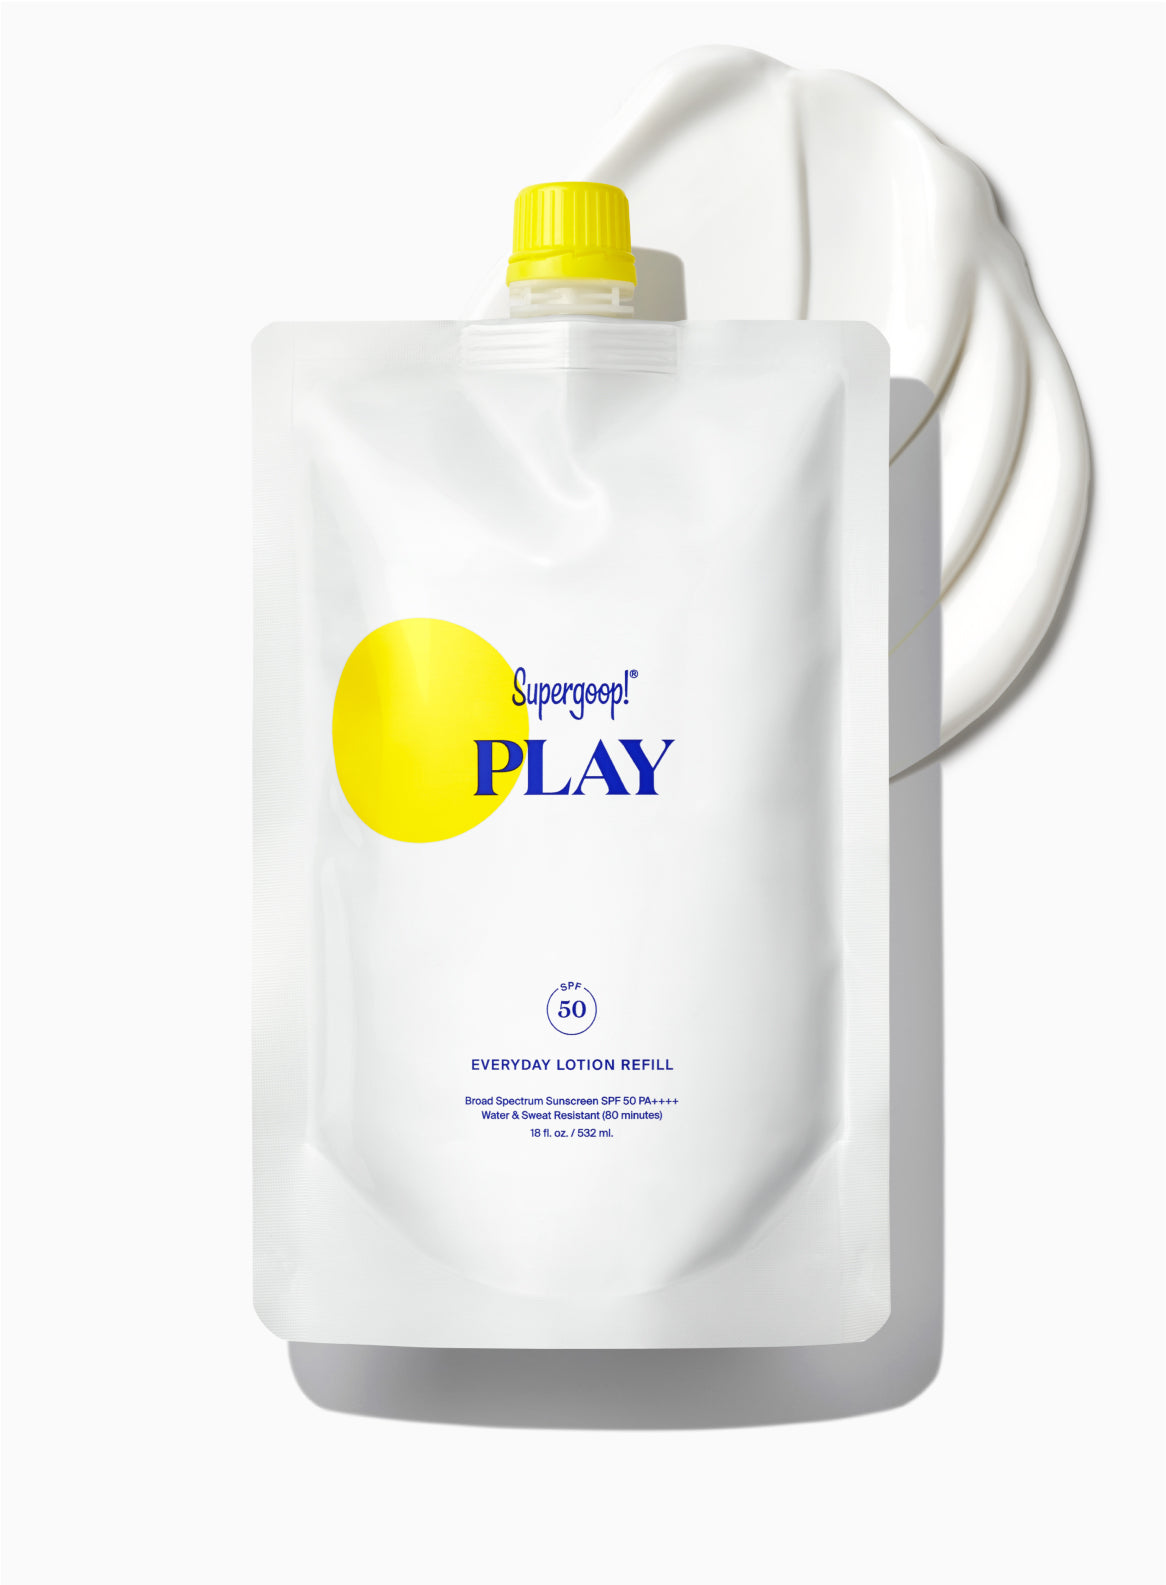 PLAY Everyday Lotion SPF 50 Pump Refill Pouch Sunscreen - Refill 18 fl. oz. | Supergoop!